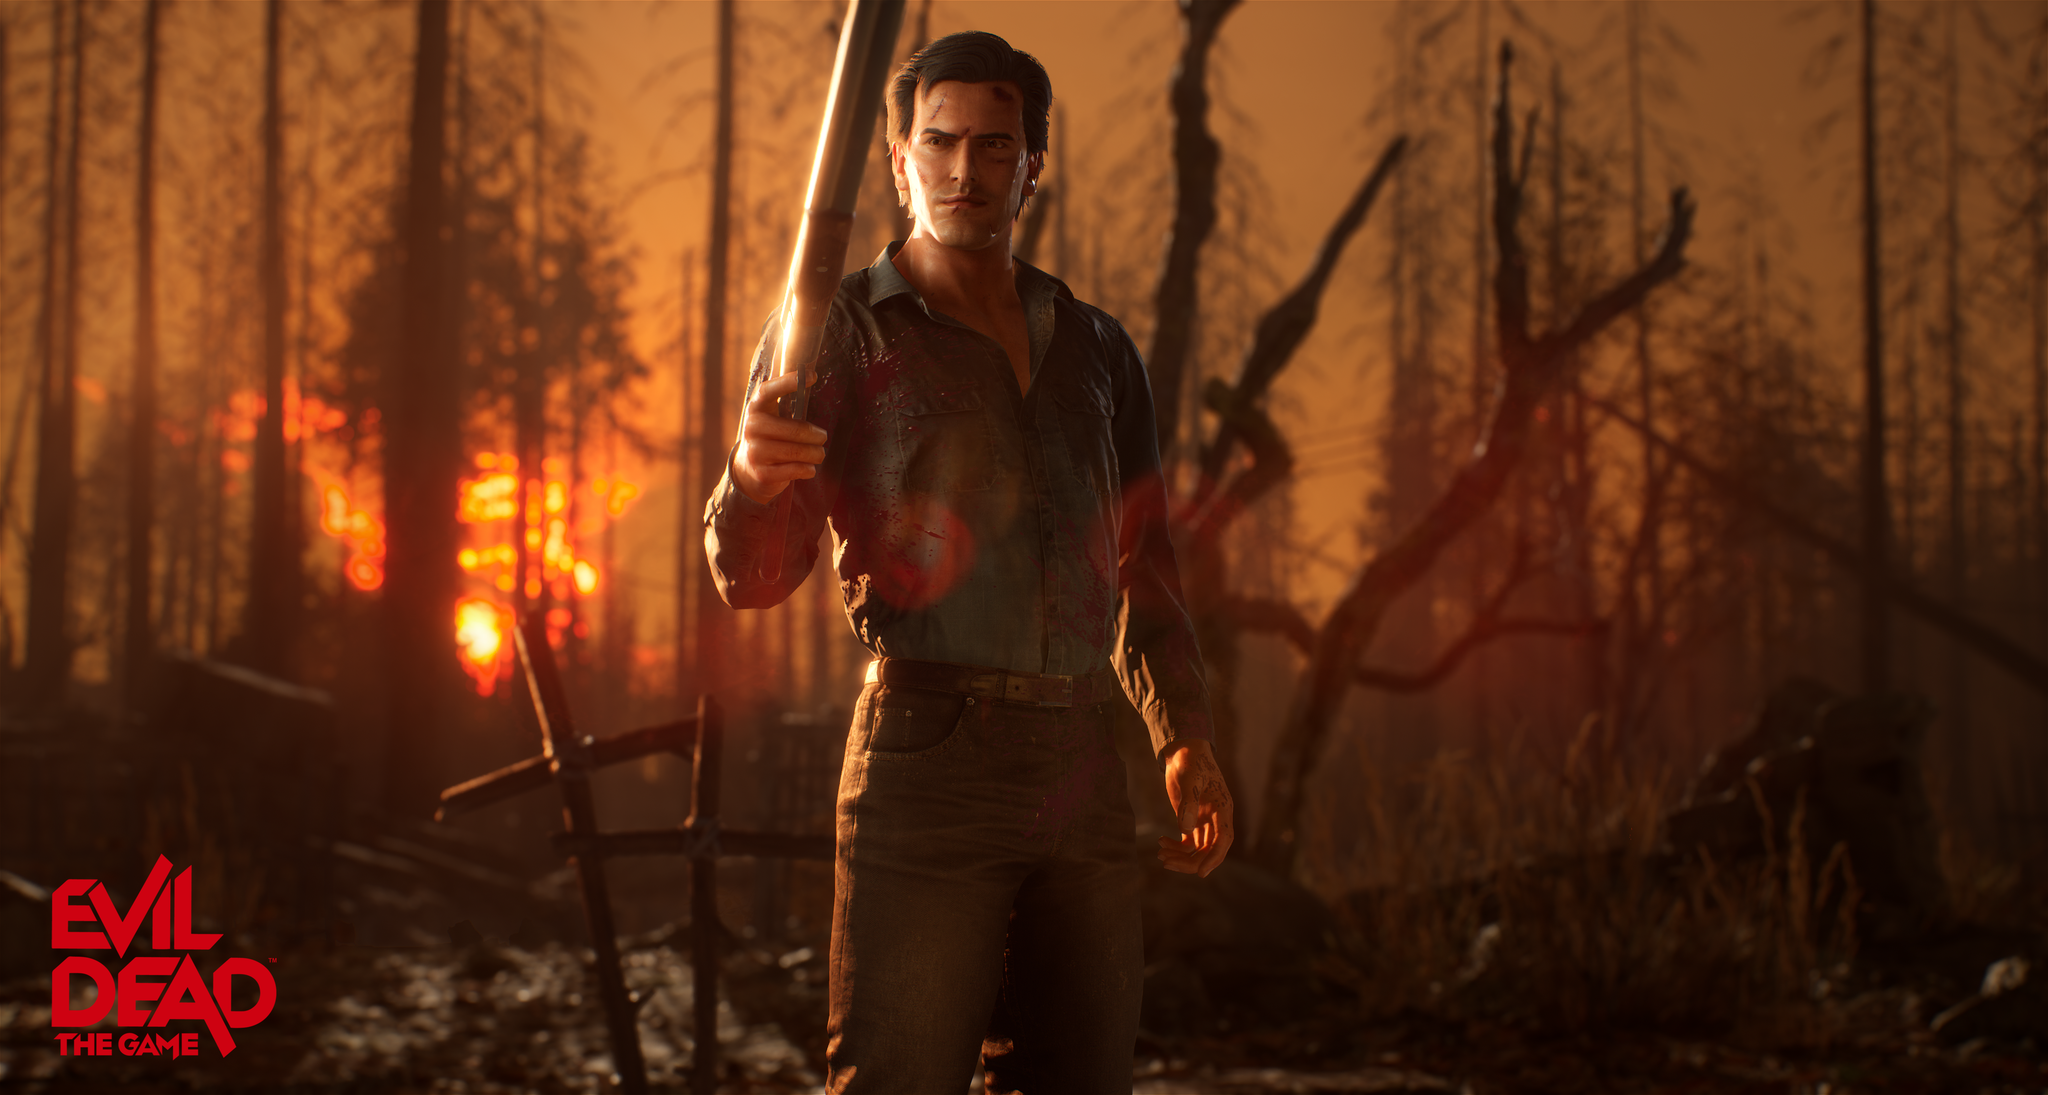 How to unlock Evil Dead: The Game characters – Amanda Fisher